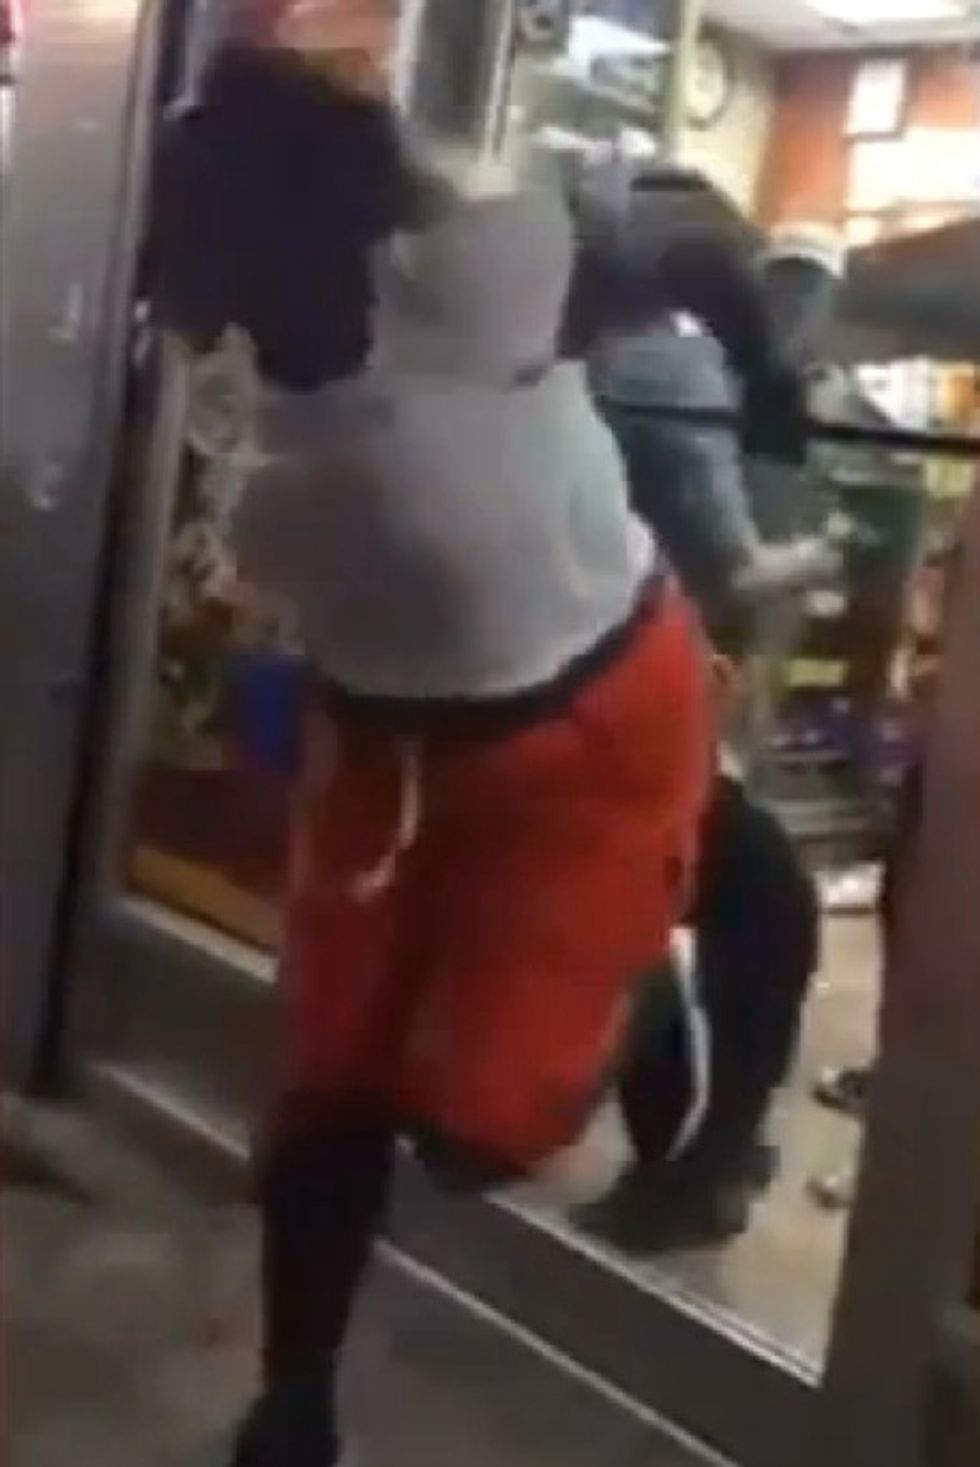 Insane Video: 'Wild' Woman Relentlessly Attacks Convenience Store Worker and Trashes Displays in Rampage